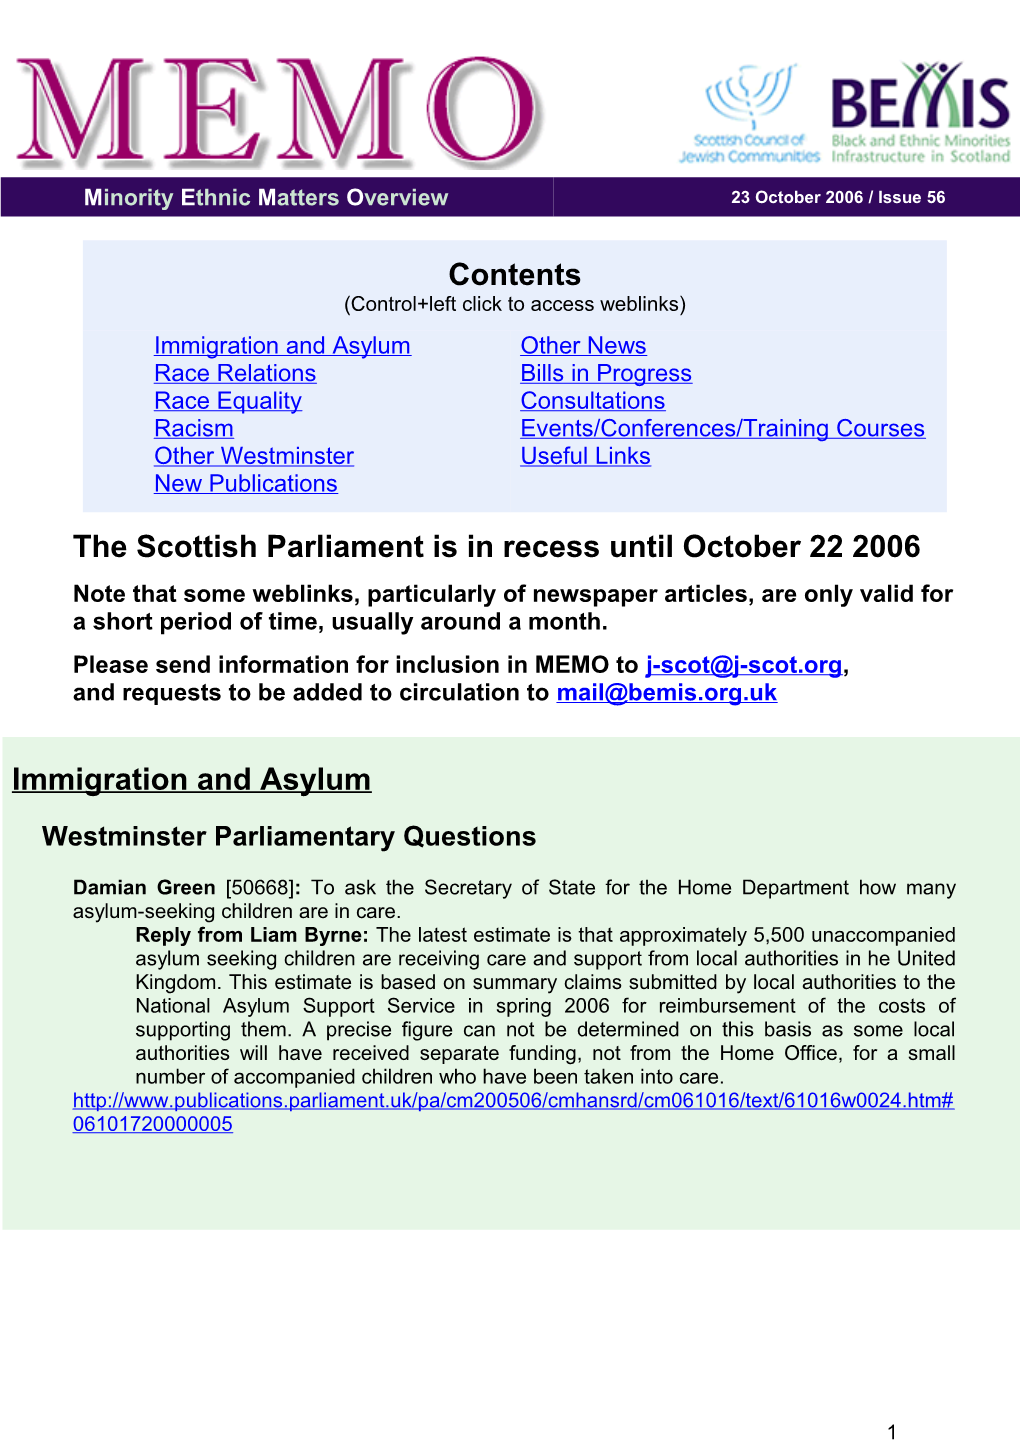 The Scottish Parliament Is in Recess Until October 22 2006